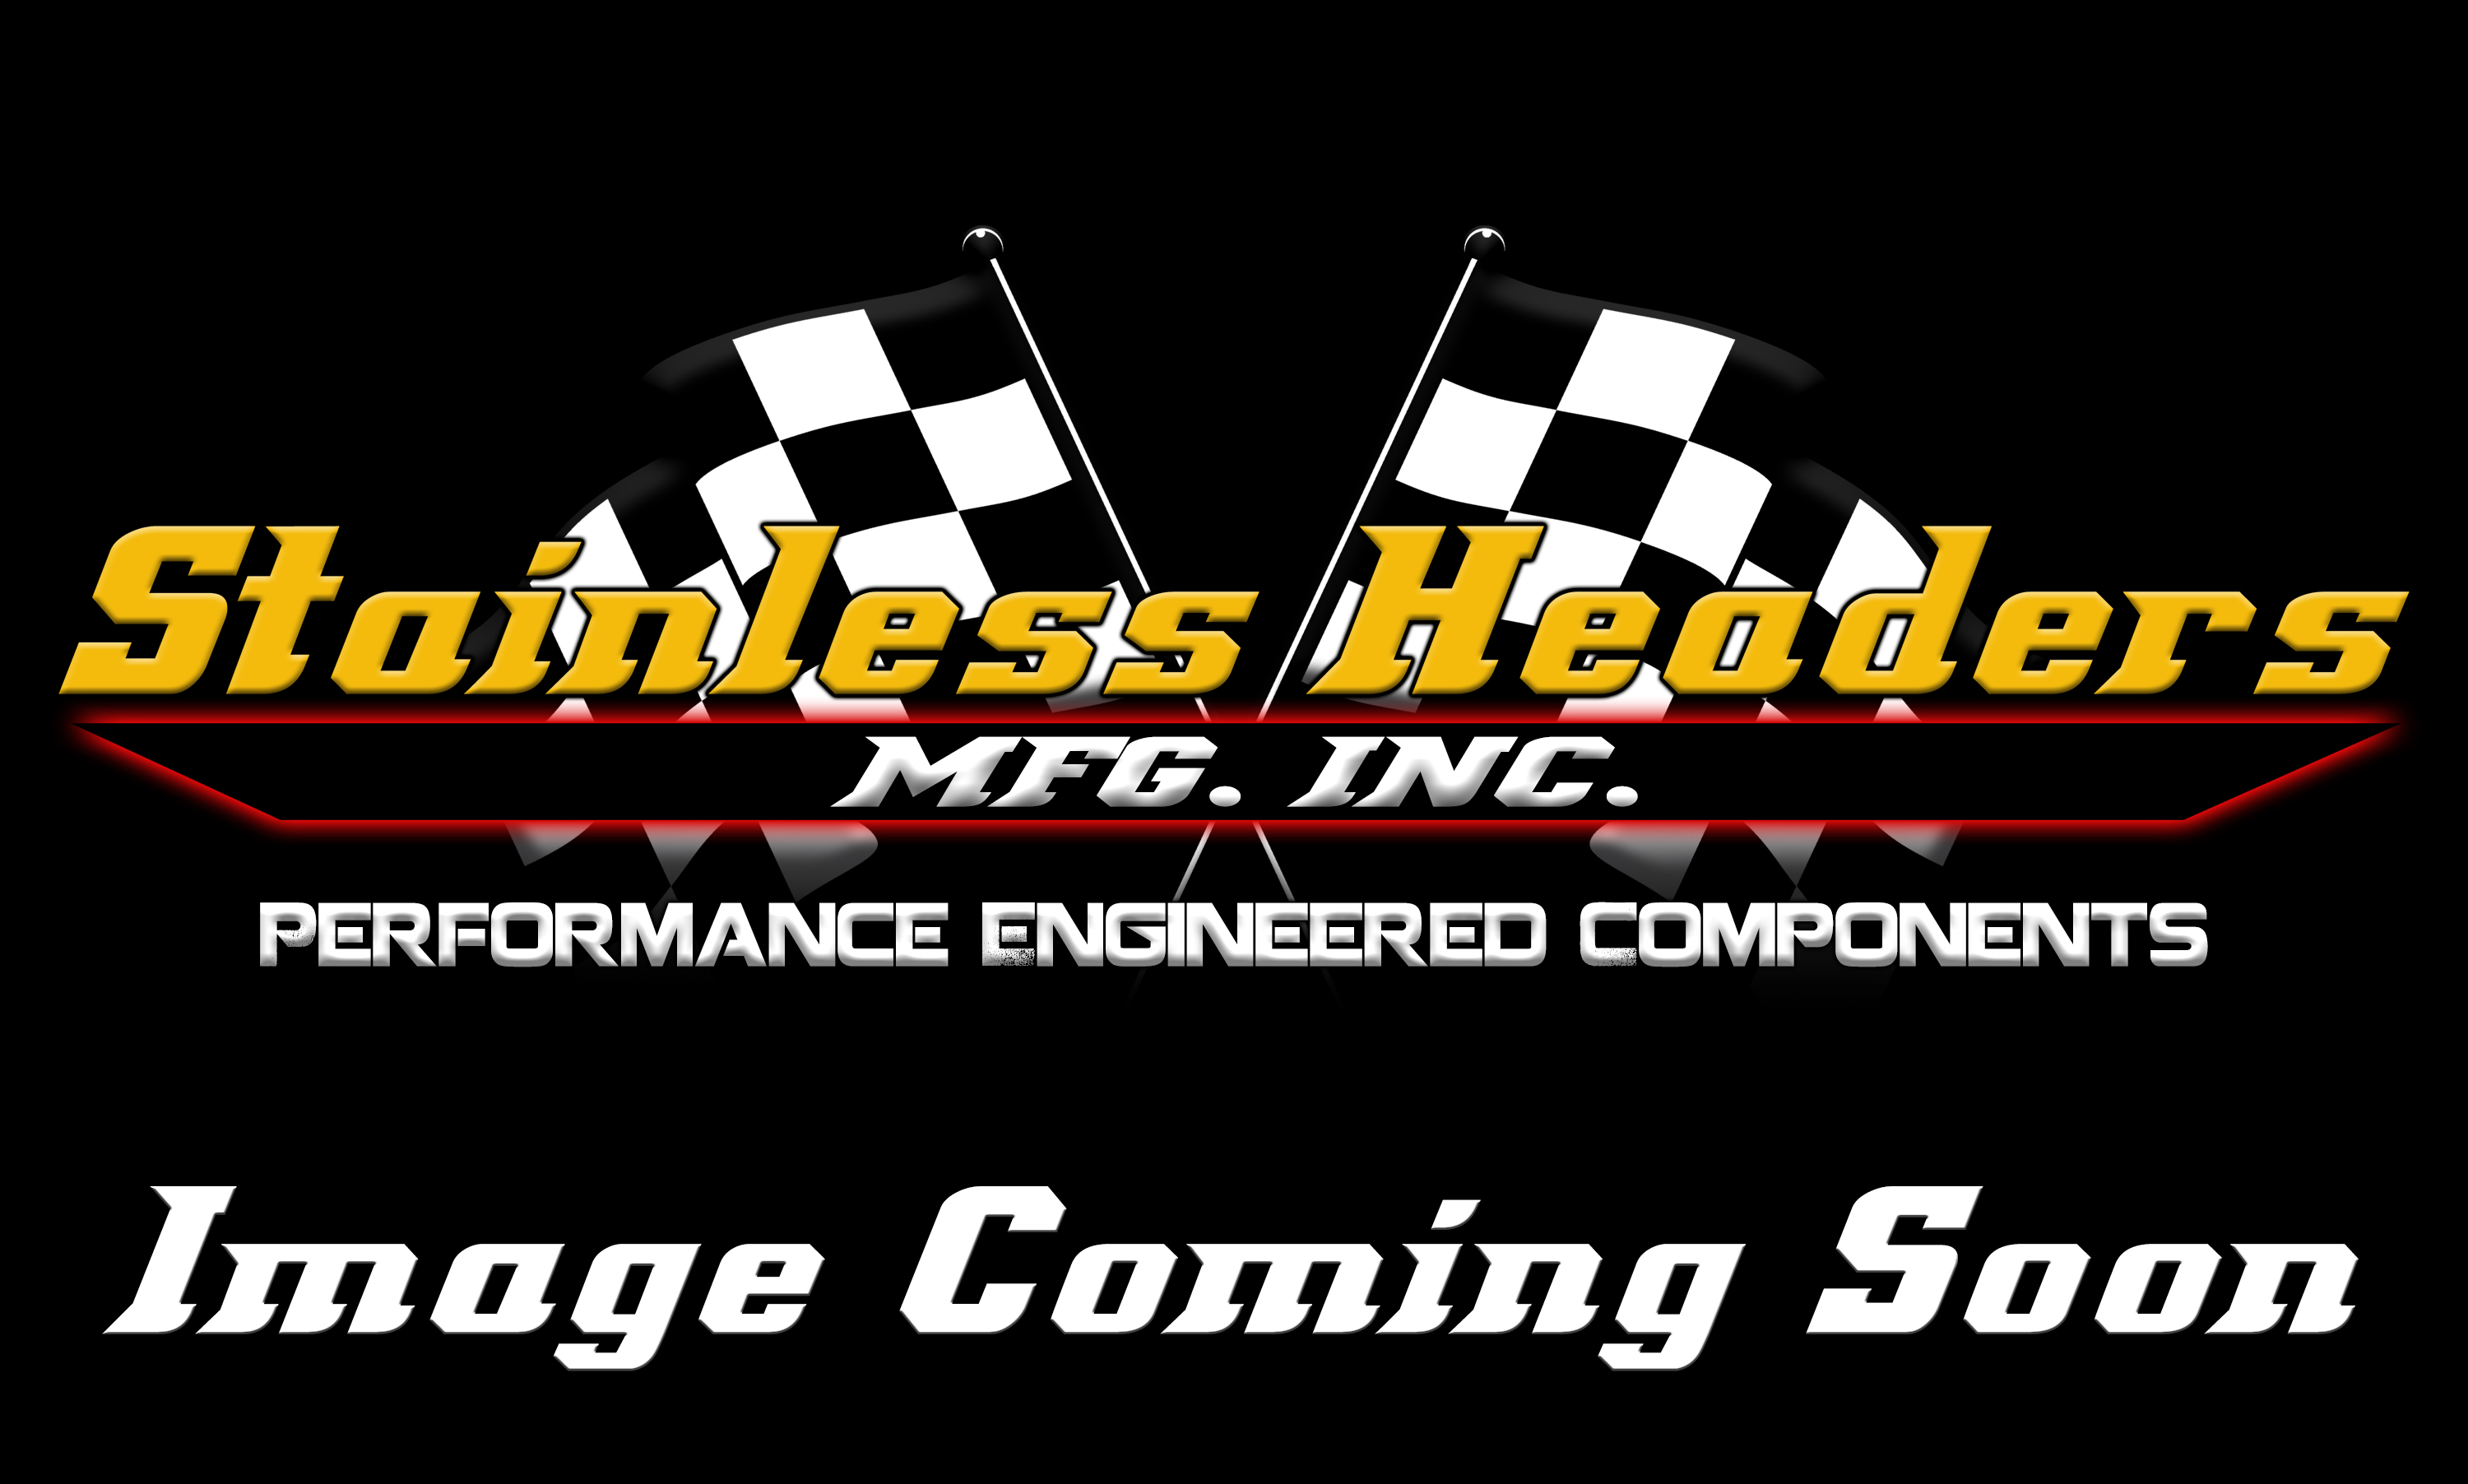 CompTurbo Technologies - CTR4828R-8890 Mid Frame Oil Lubricated 2.0 Turbocharger (1850 HP) - Image 1